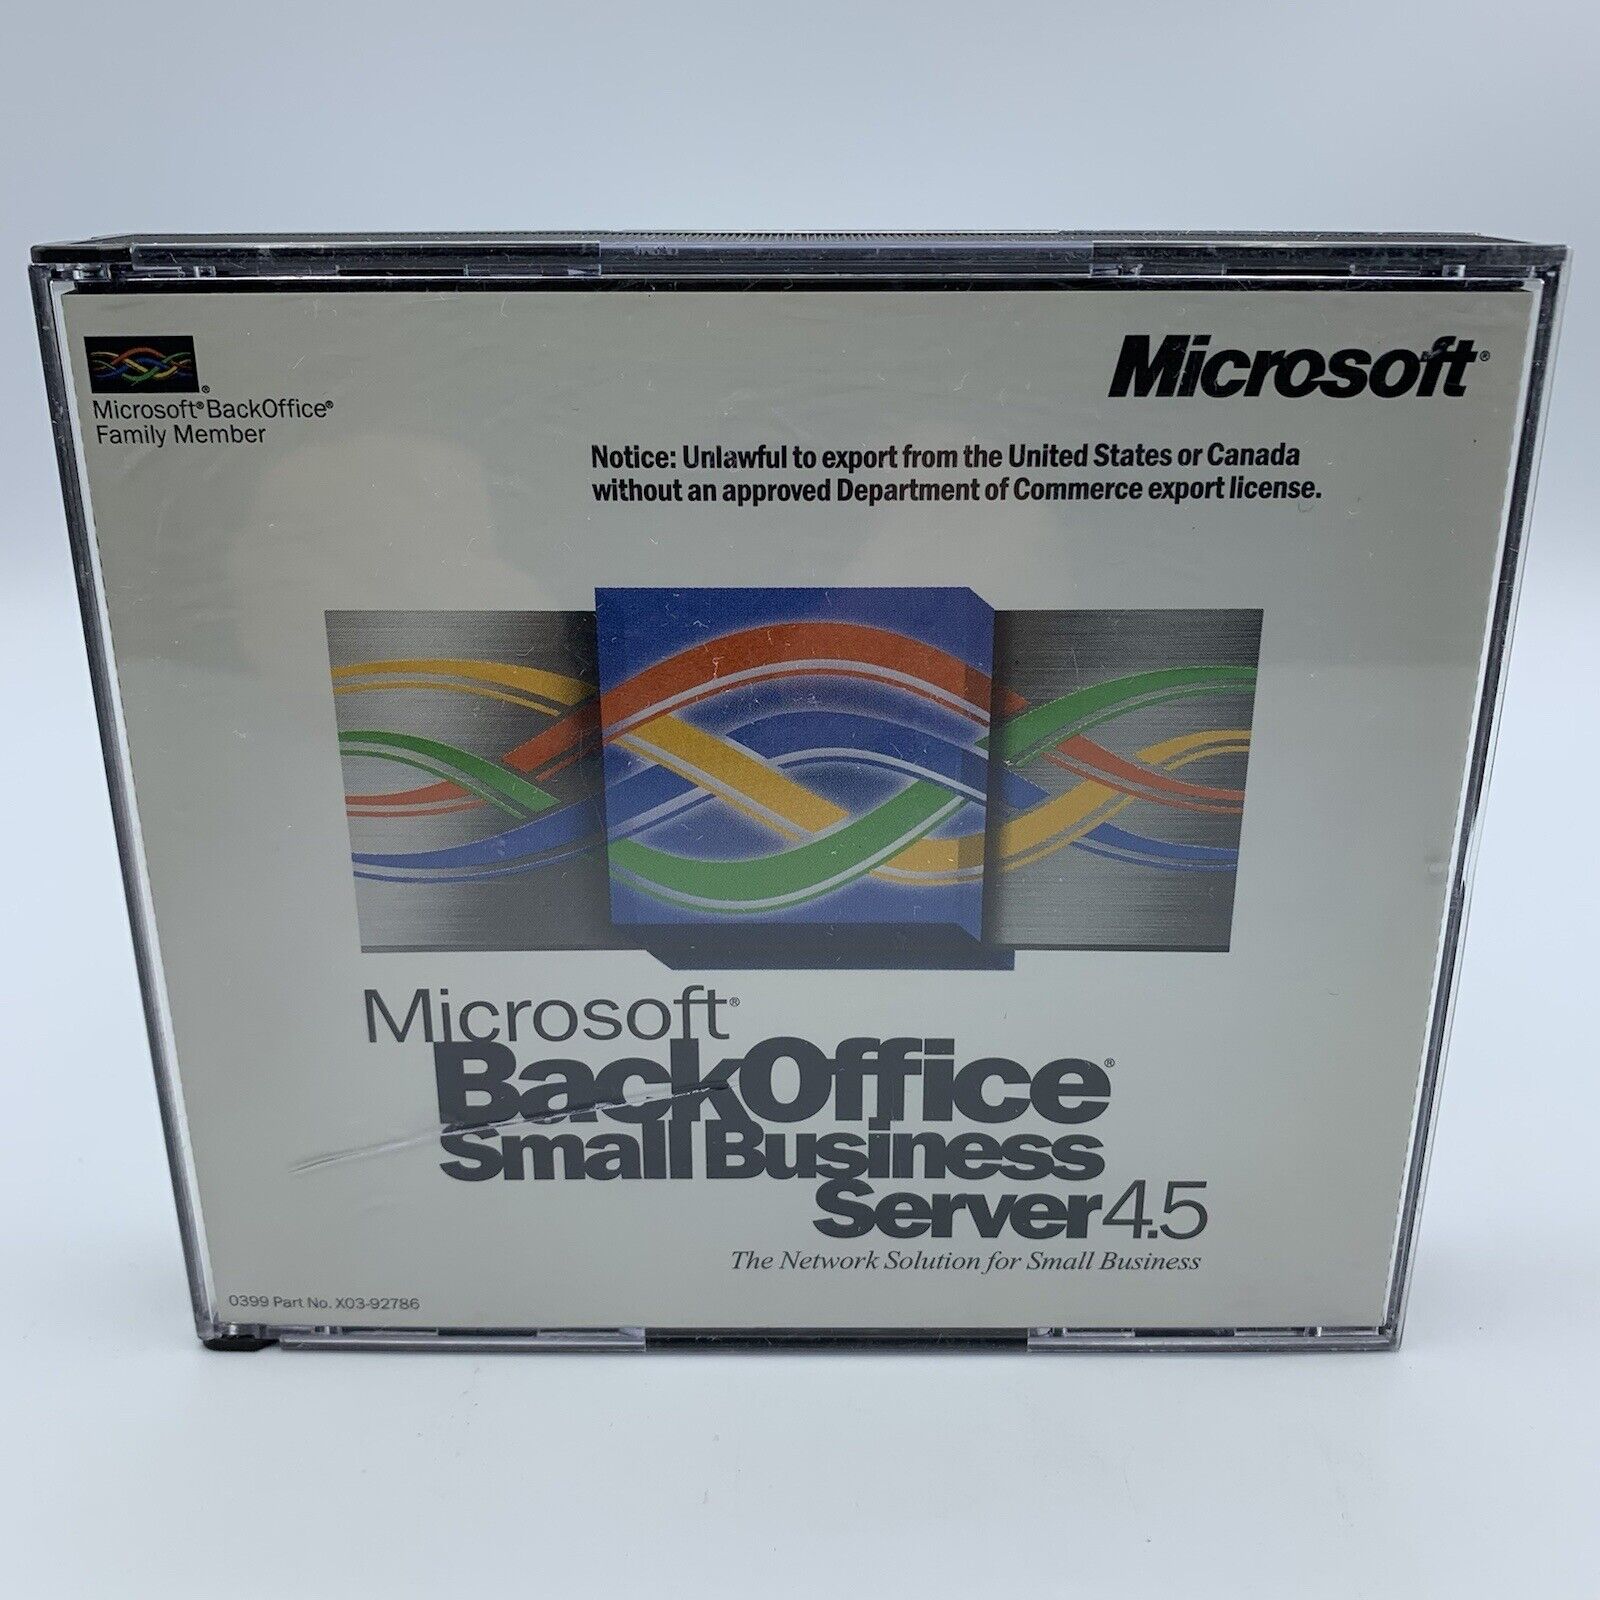 Microsoft BackOffice Small Business Server v4.5 With CD Key